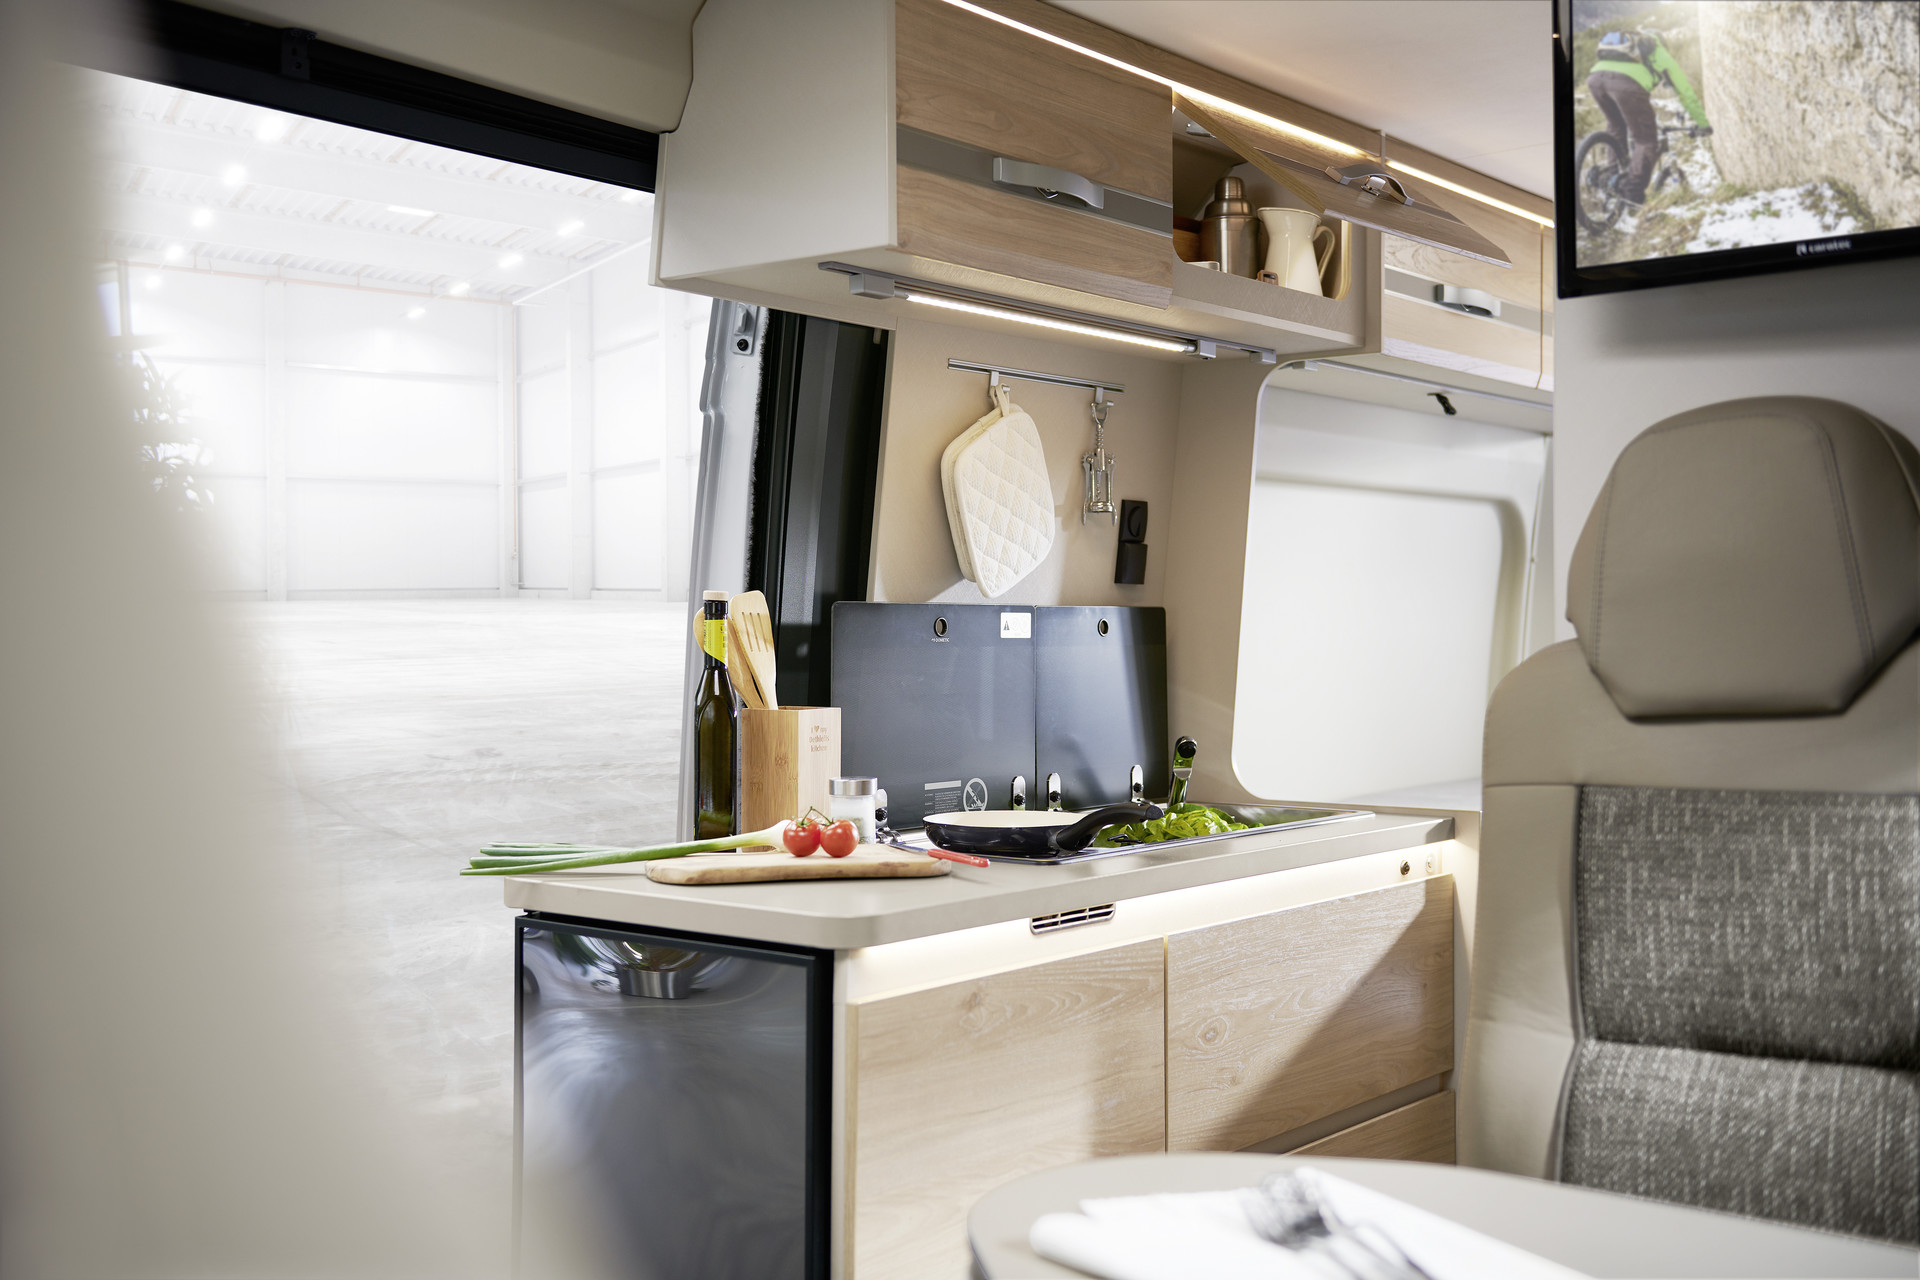 Cooking (almost) as you would at home. Optimum use of the space and surfaces. The large fridge is easy to access from inside and outside of the vehicle thanks to the door, which has an opening angle of 180°.